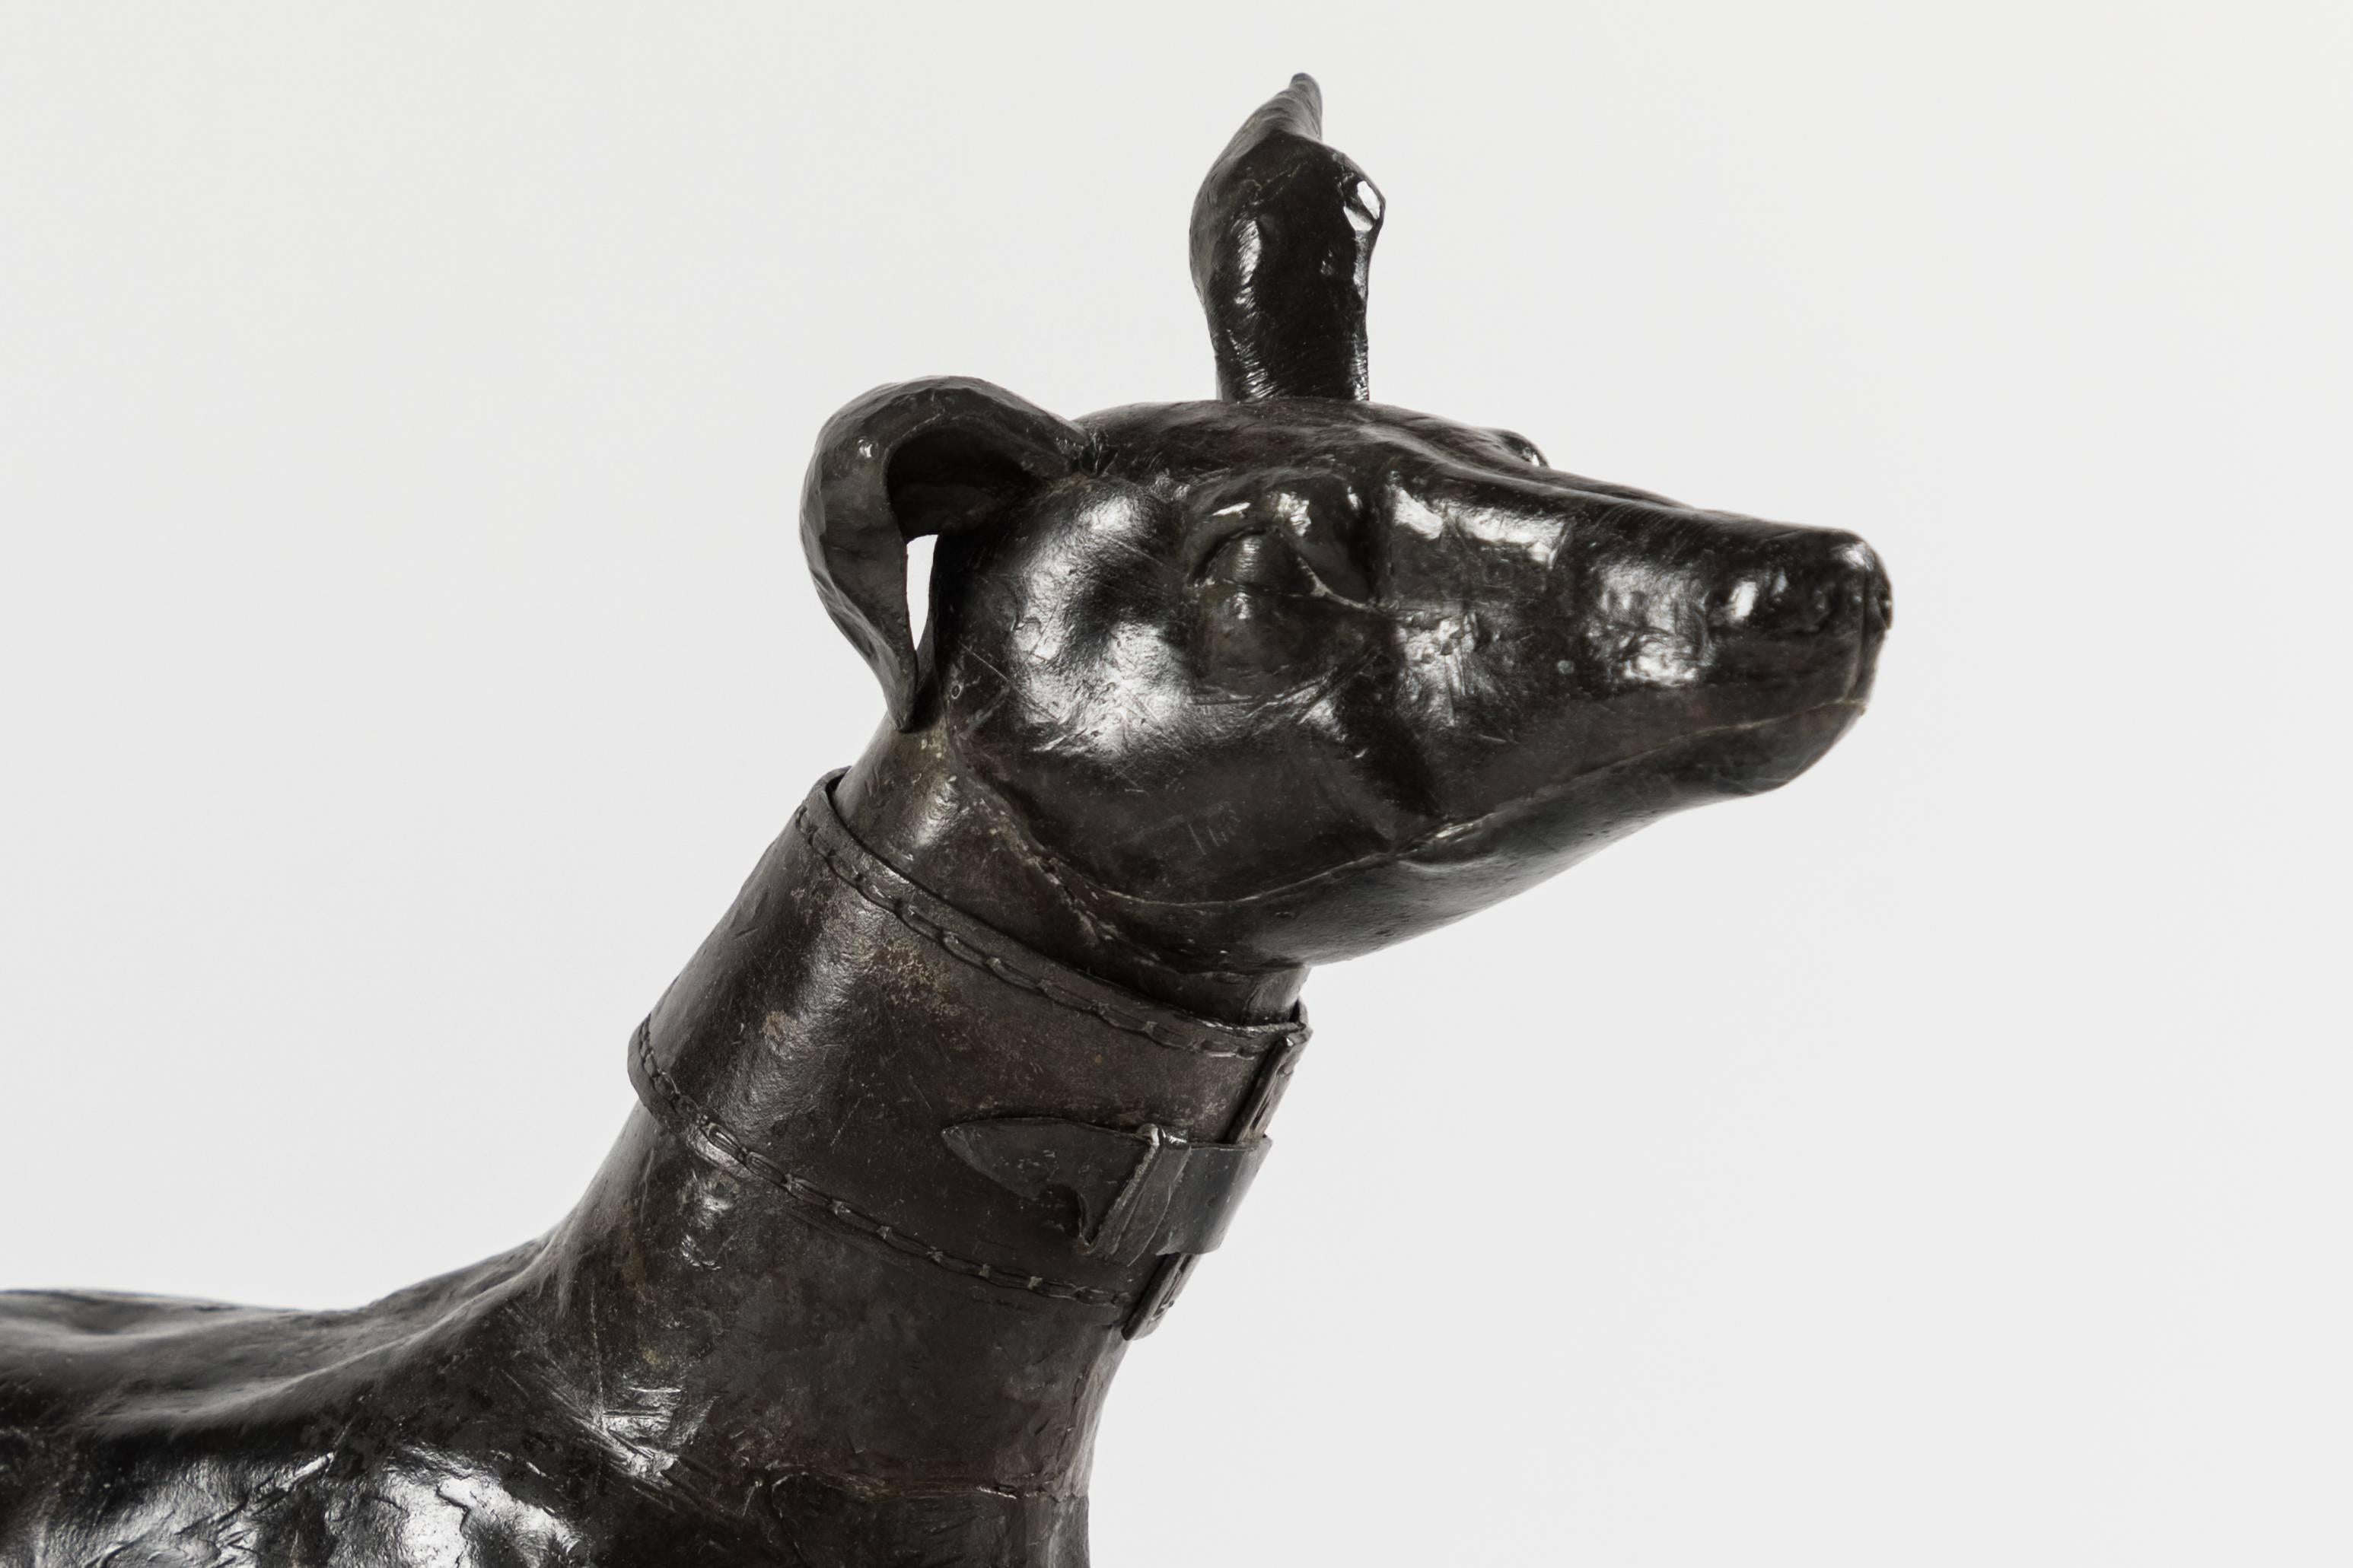 A charming Lead alloy greyhound depicted in a classic reclining position. The collar is nicely detailed and is separate from the dog casting. This little dog has a wonderful patina.